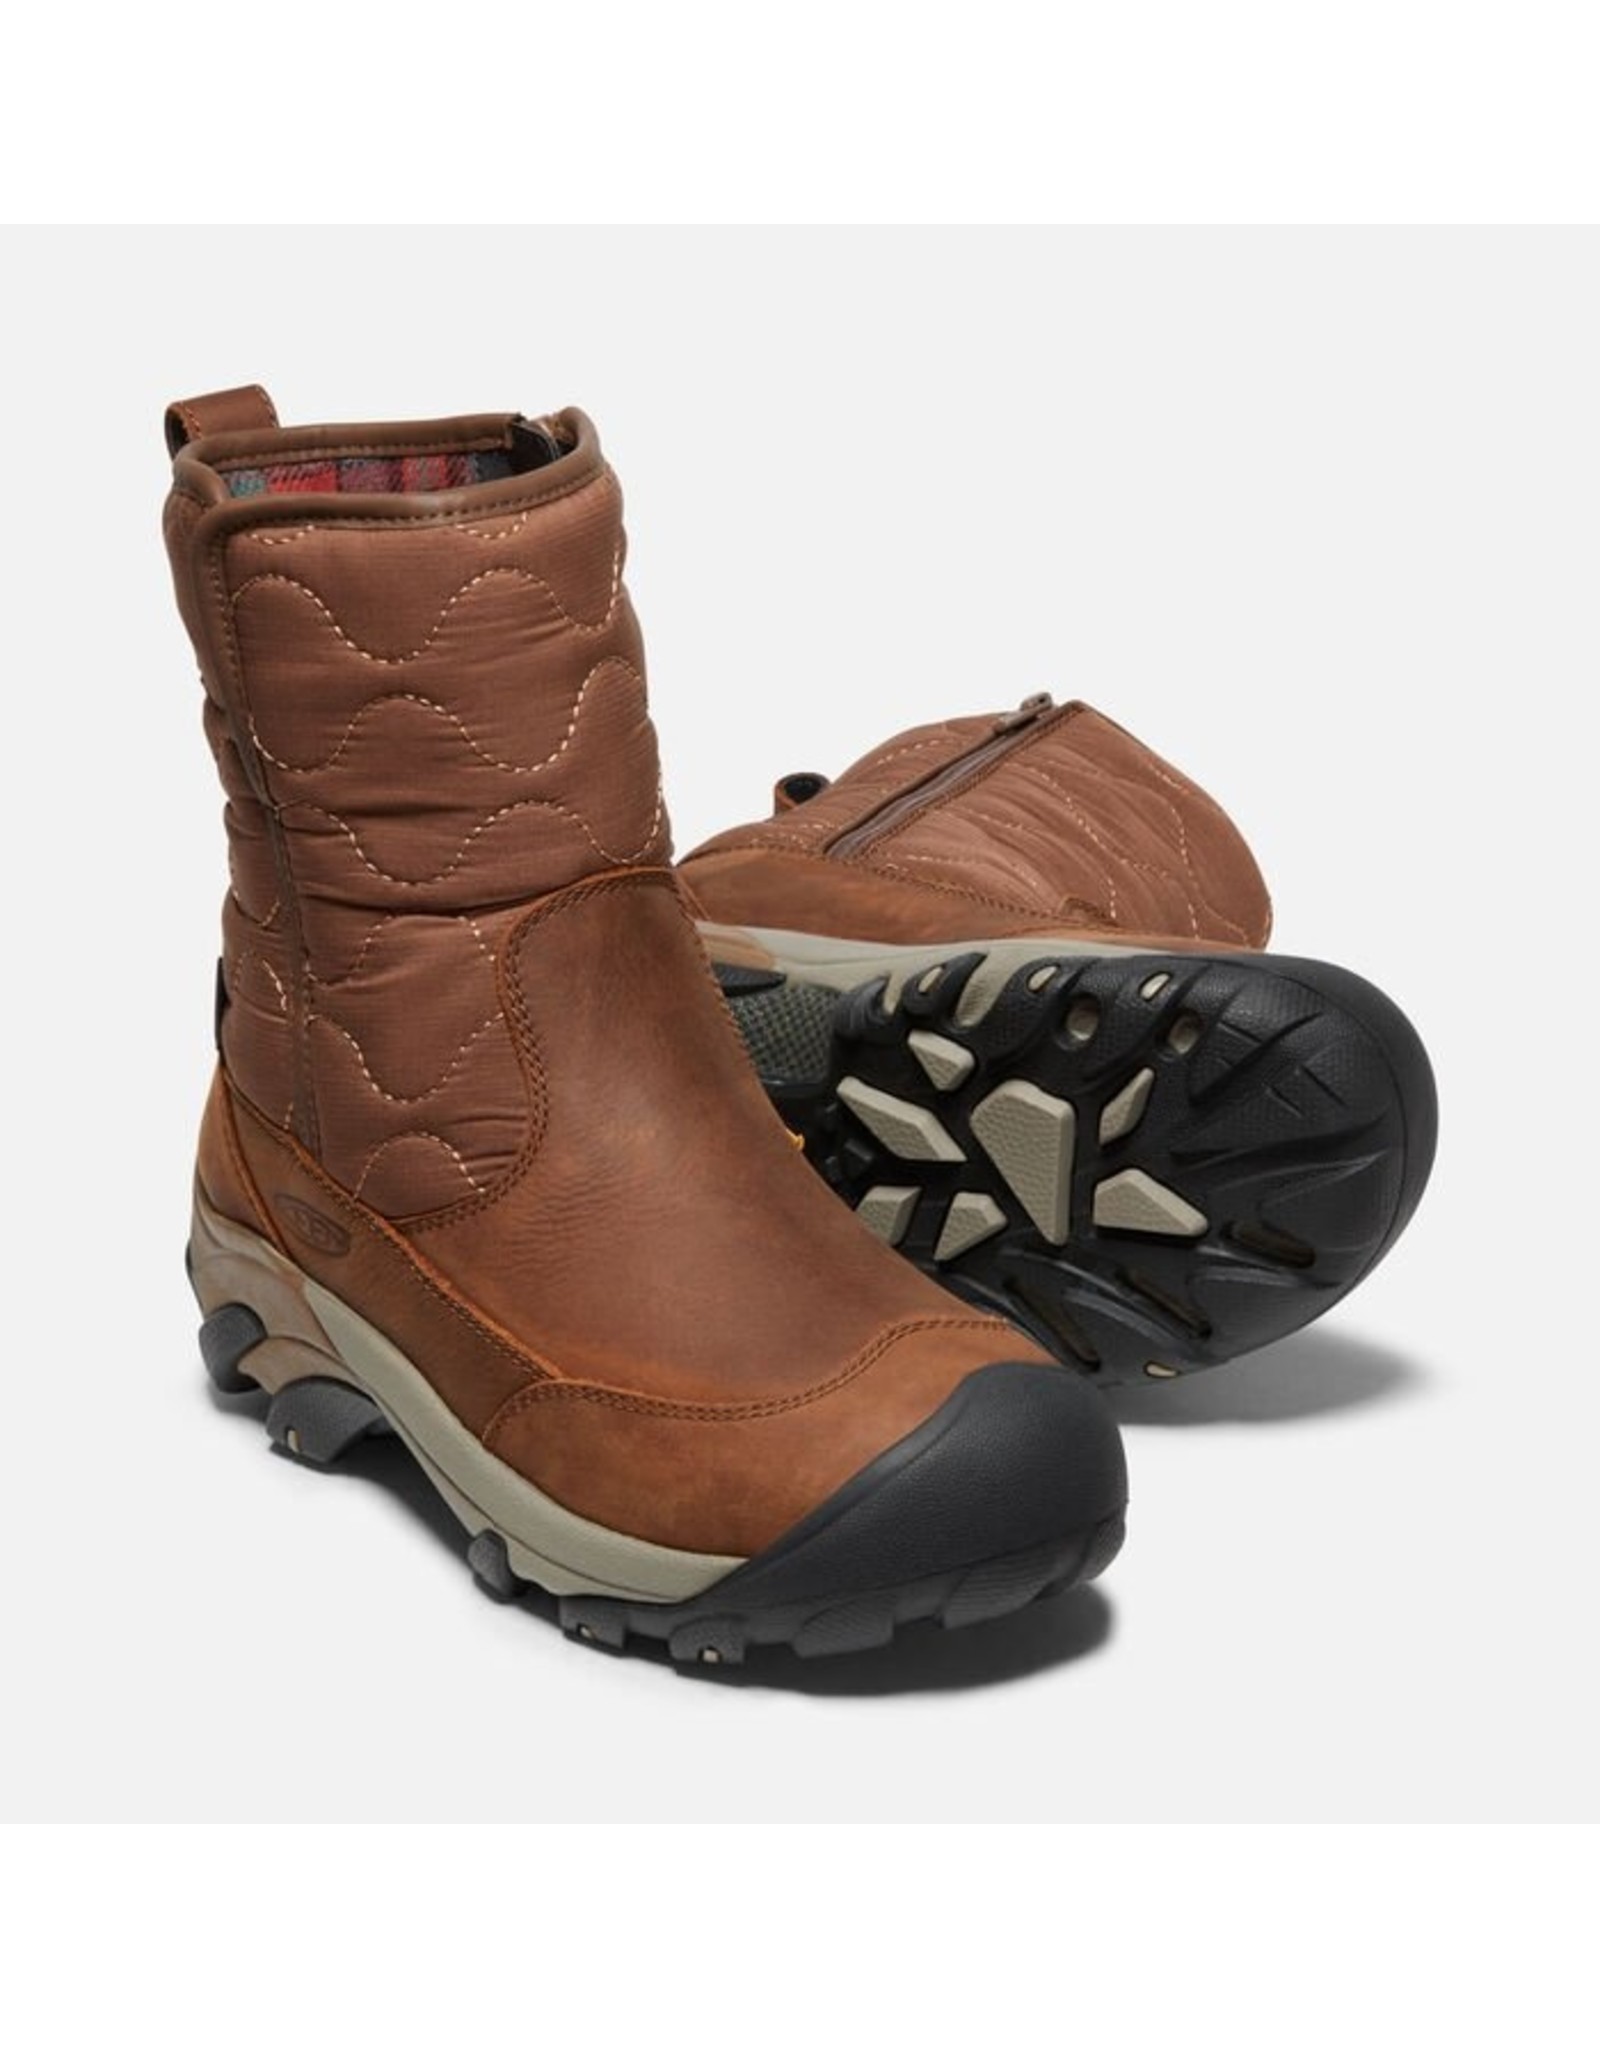 KEEN WOMEN'S BETTY BOOT PULL-ON WP-BROWN/BLACK